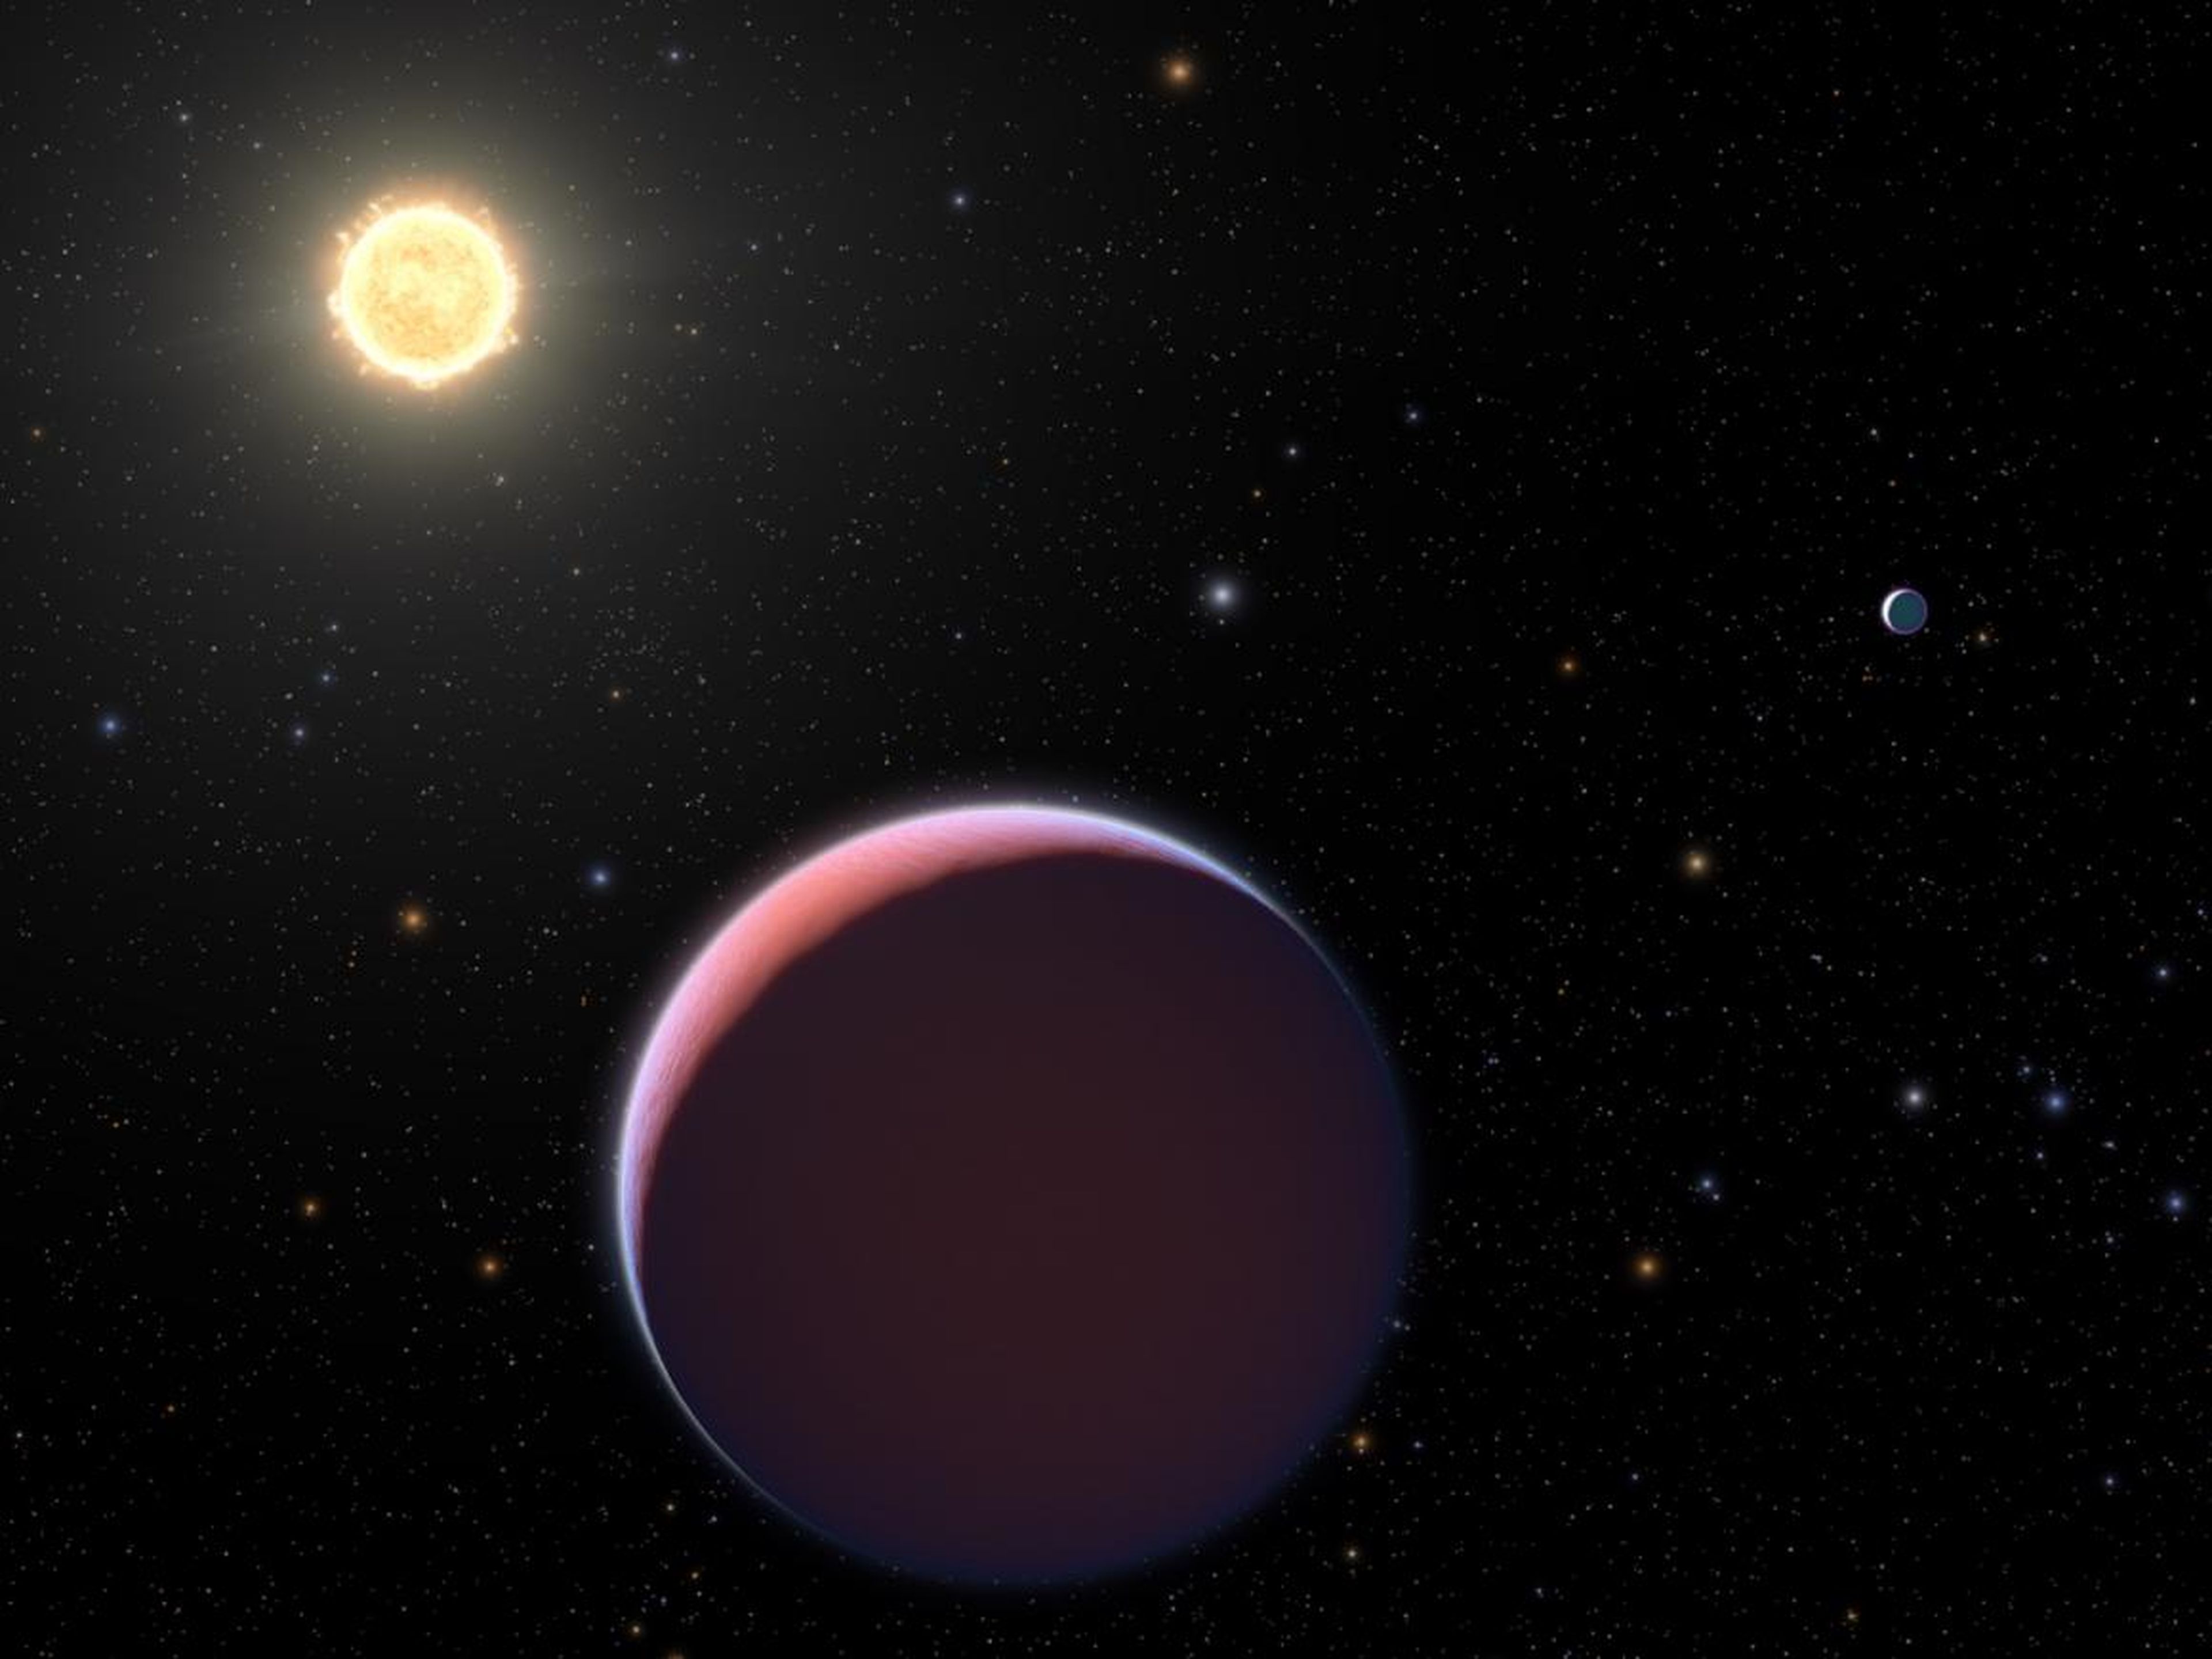 An artist's illustration of the sun-like star Kepler 51 and two of its three giant super-puff planets that NASA's Kepler space telescope discovered in 2012.